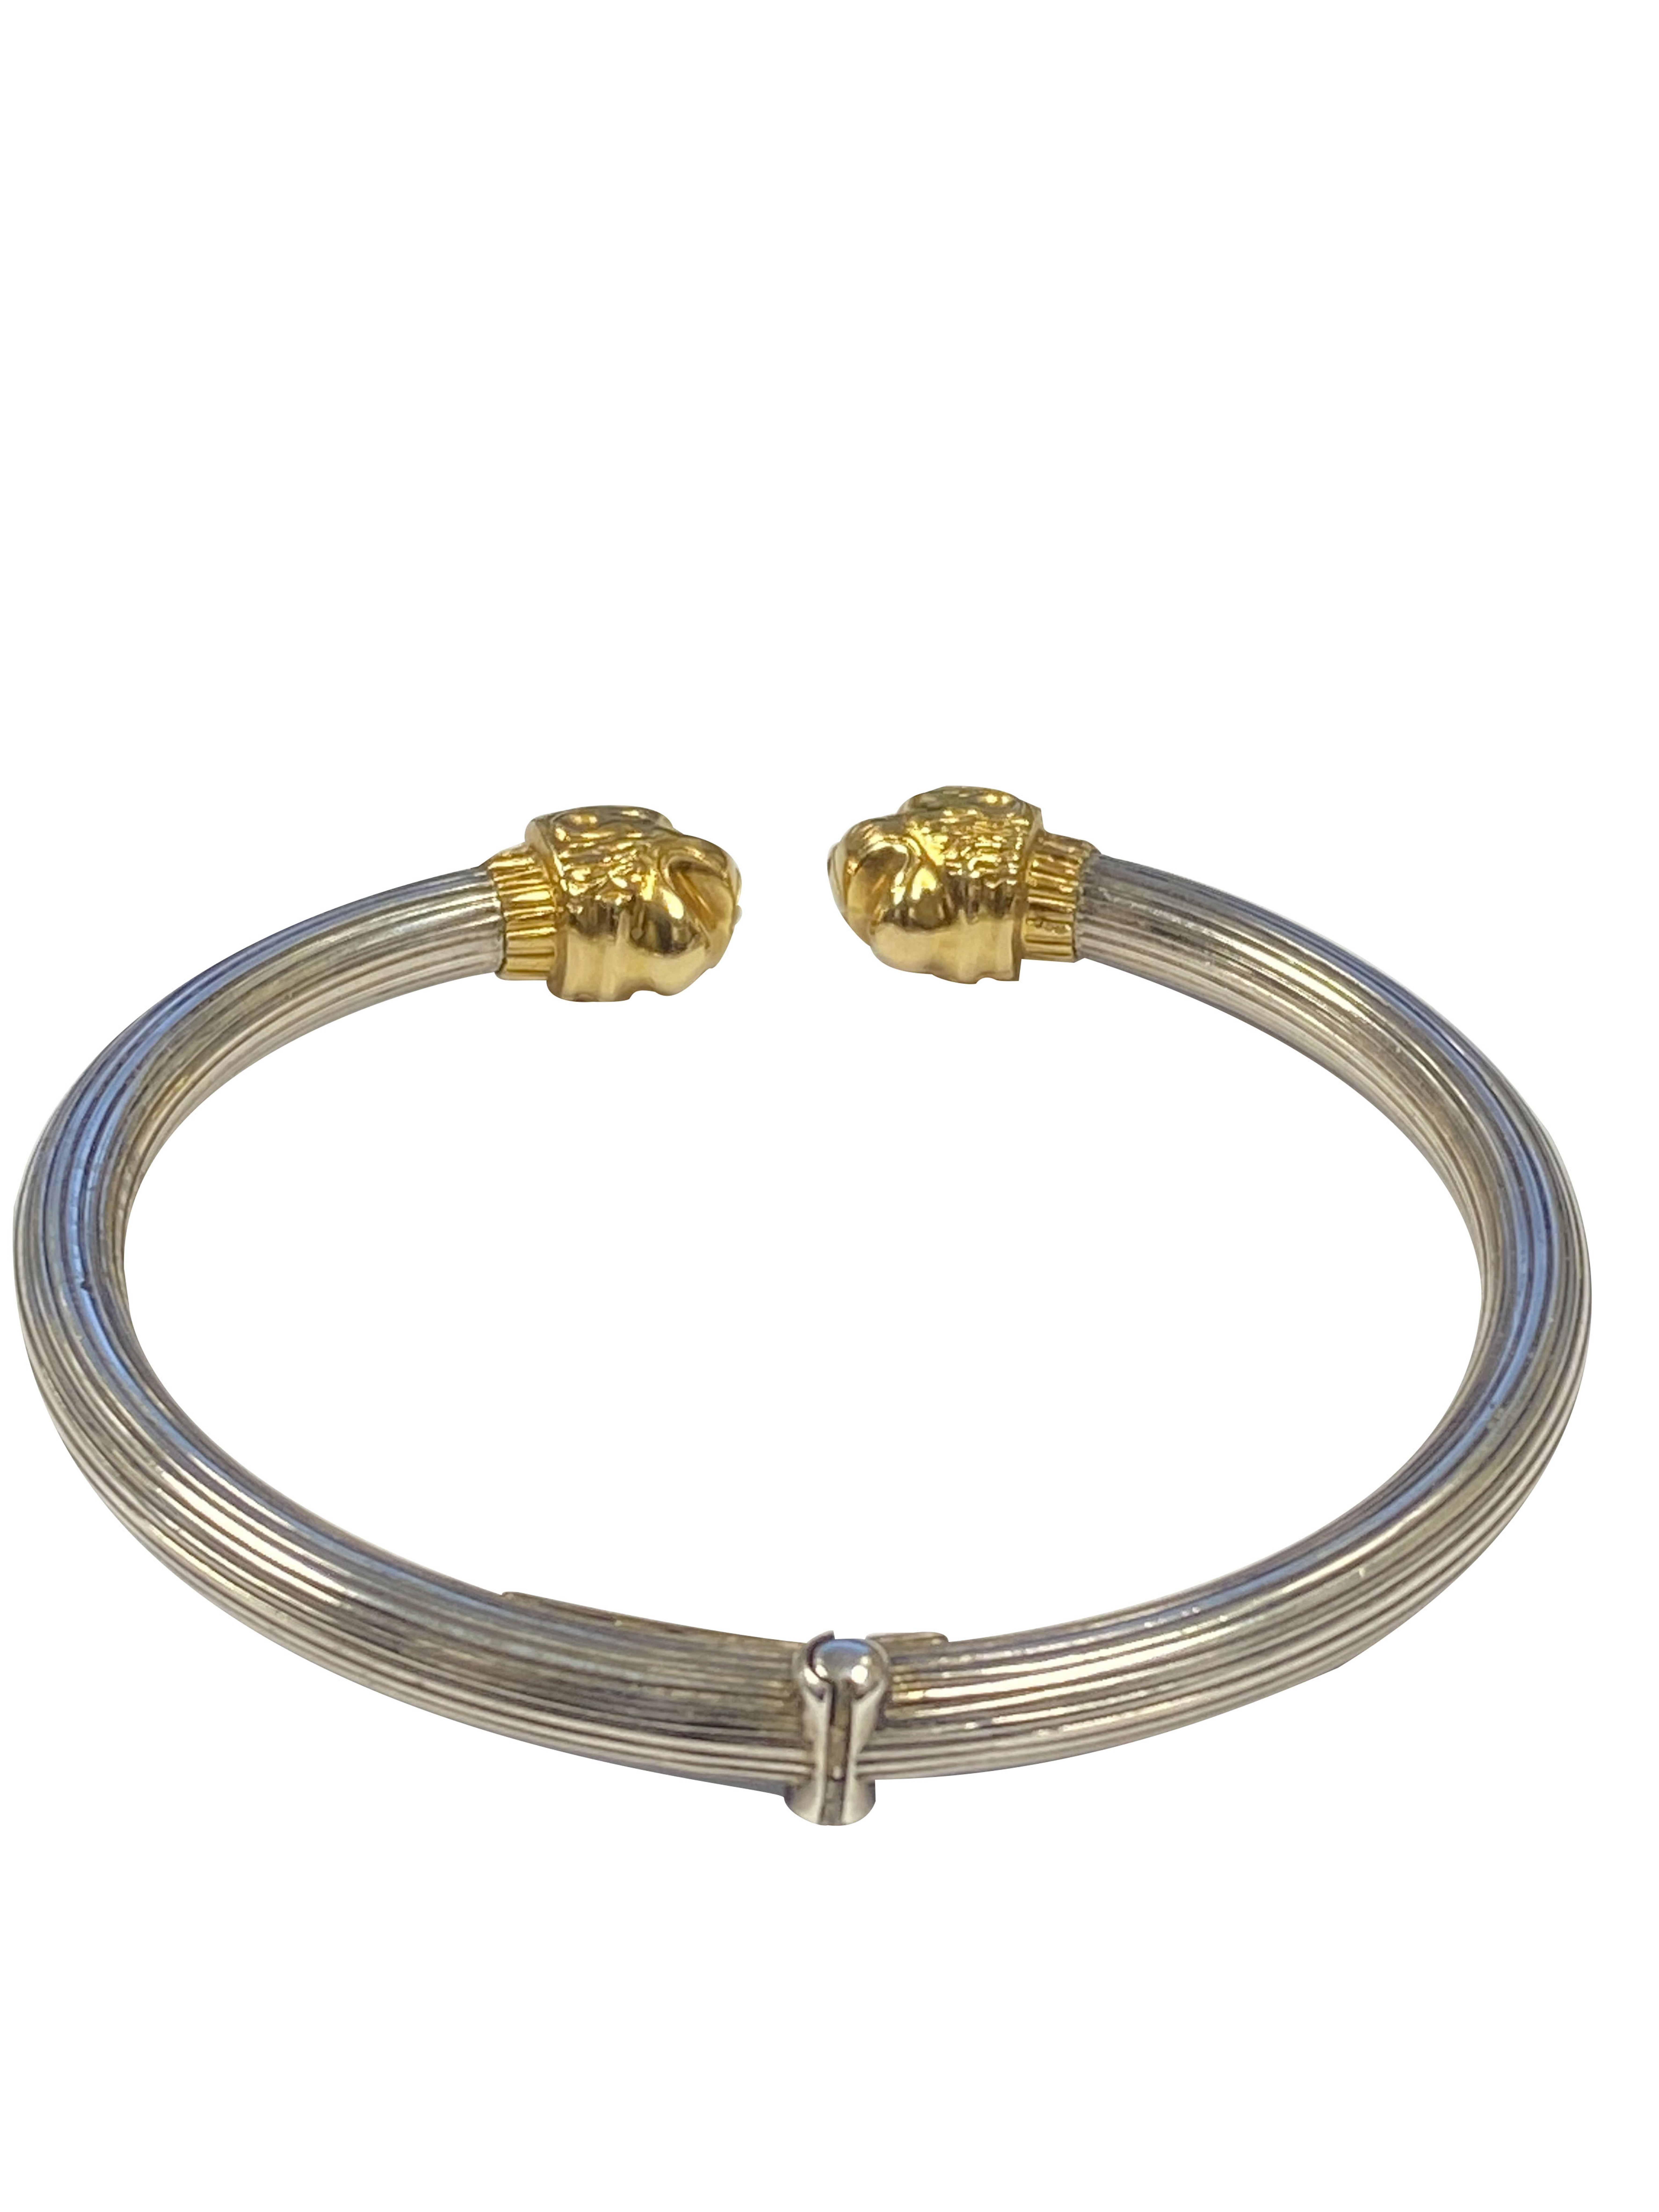 Circa 1990 Chimera Bracelet by Ilias LaLaounis, 925 Sterling Silver central Tube body with deep grooves and measuring 4.5 M.M. in thickness, Detailed 18K Yellow Gold Chimera Heads cap each end of the bracelet, hinged opening and will fit a wrist 5